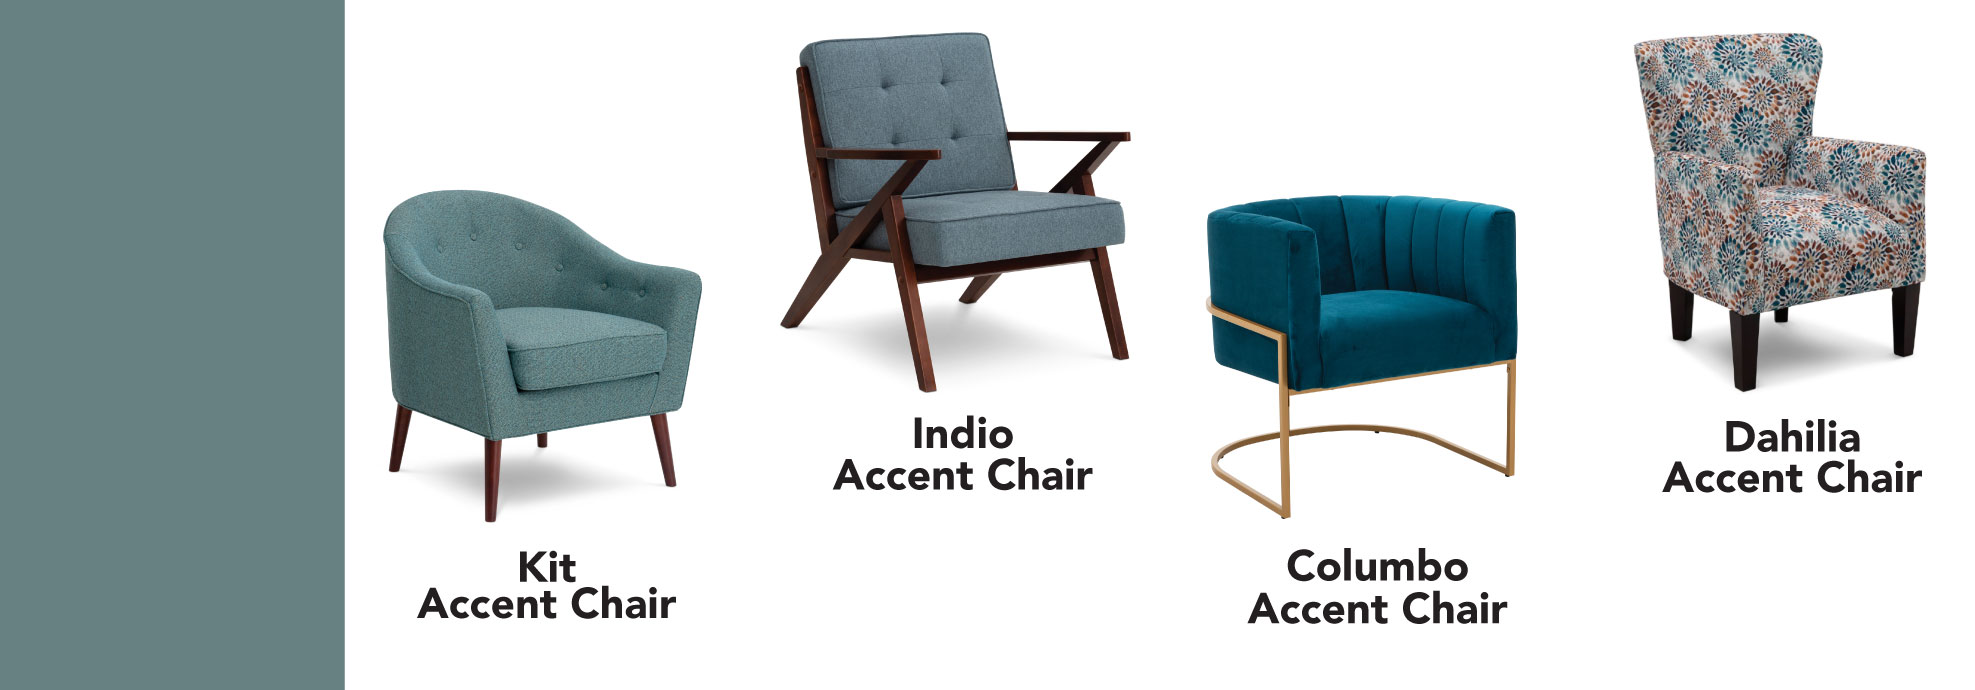 Kit Accent Chair. Indie Accent Chair. Colombo Accent Chair. Dahilia Accent Chair.